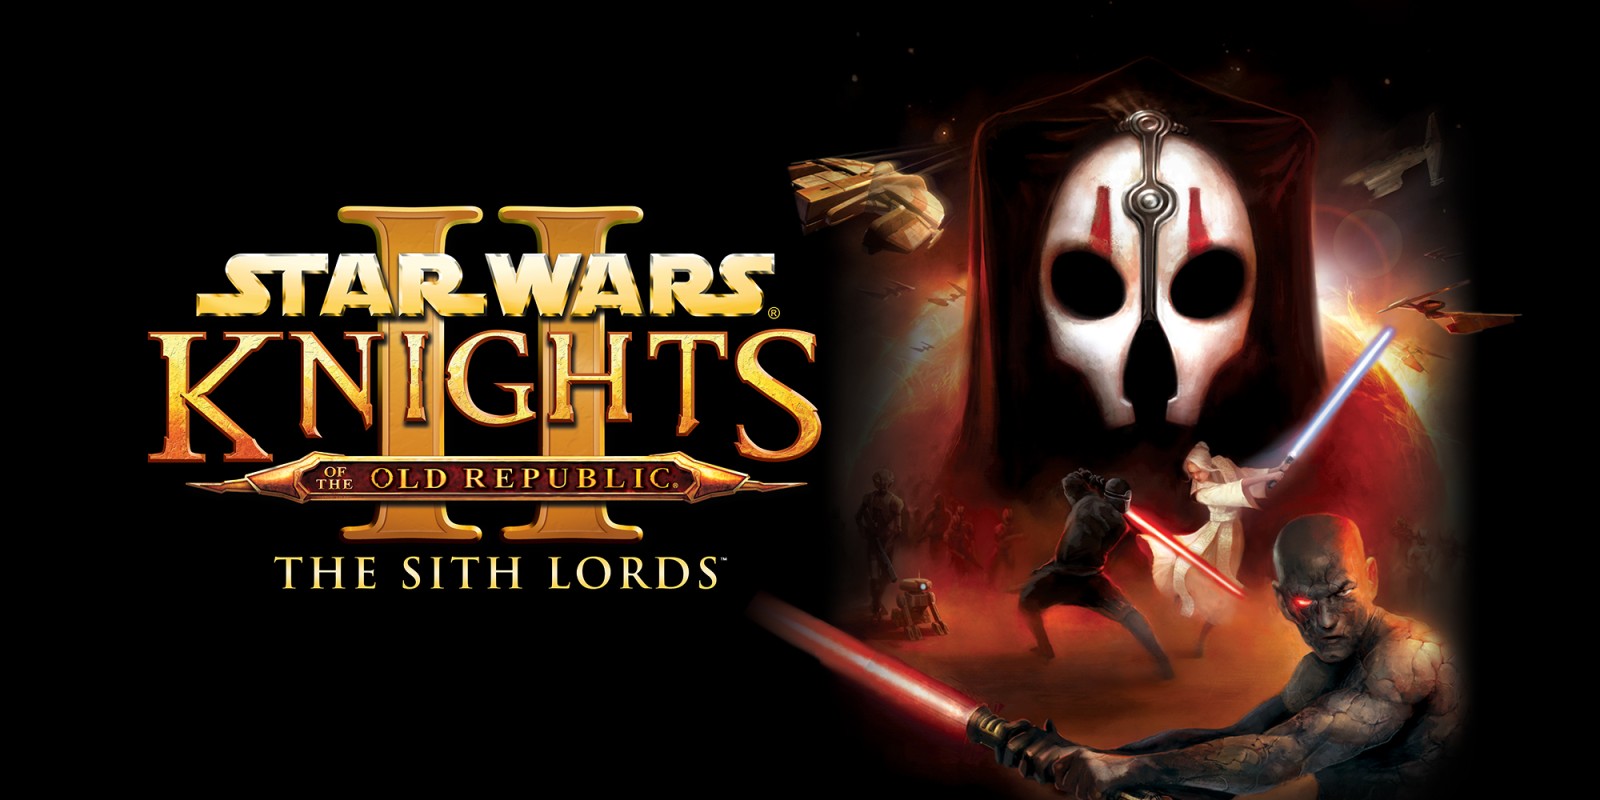 Star Wars: Knights of the Old Republic II: The Sith Lords – Una recensione